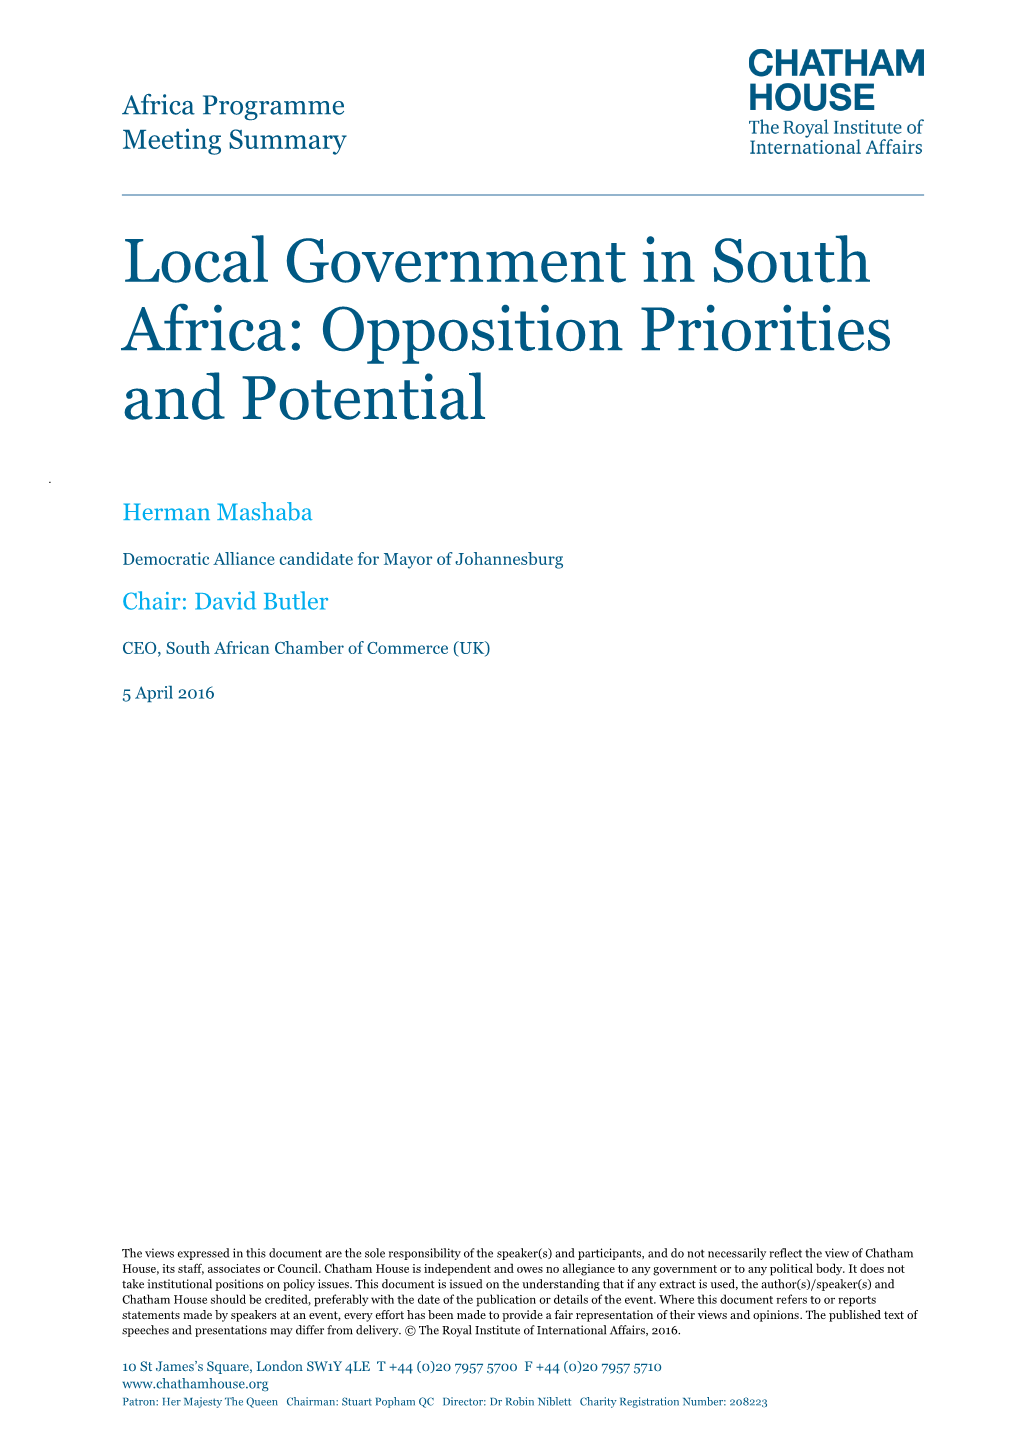 Local Government in South Africa: Opposition Priorities and Potential